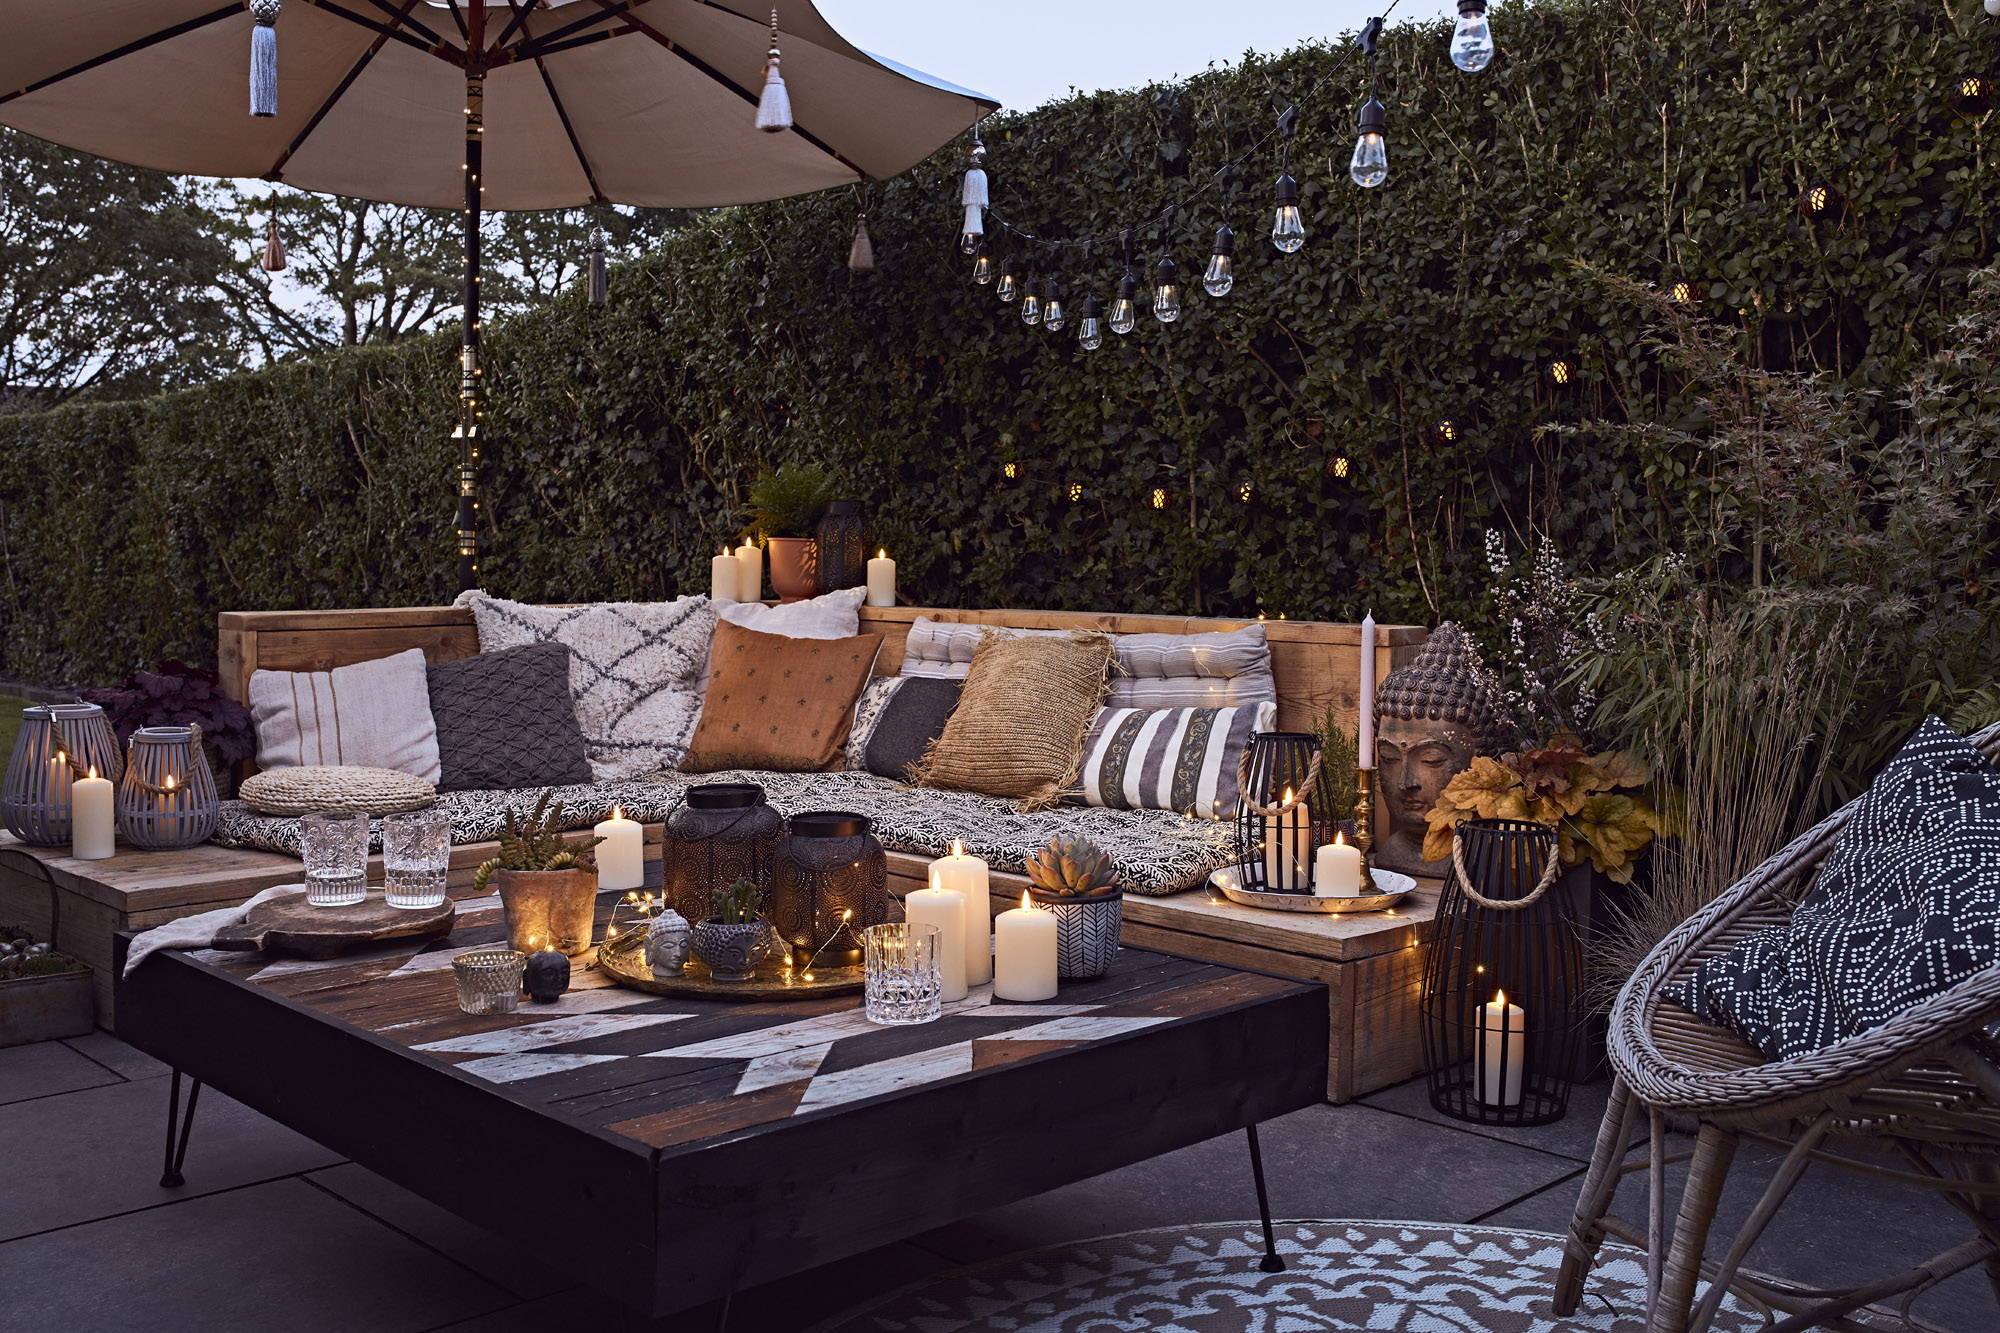 Outdoor garden seating area with festoons, LED candles and lanters.